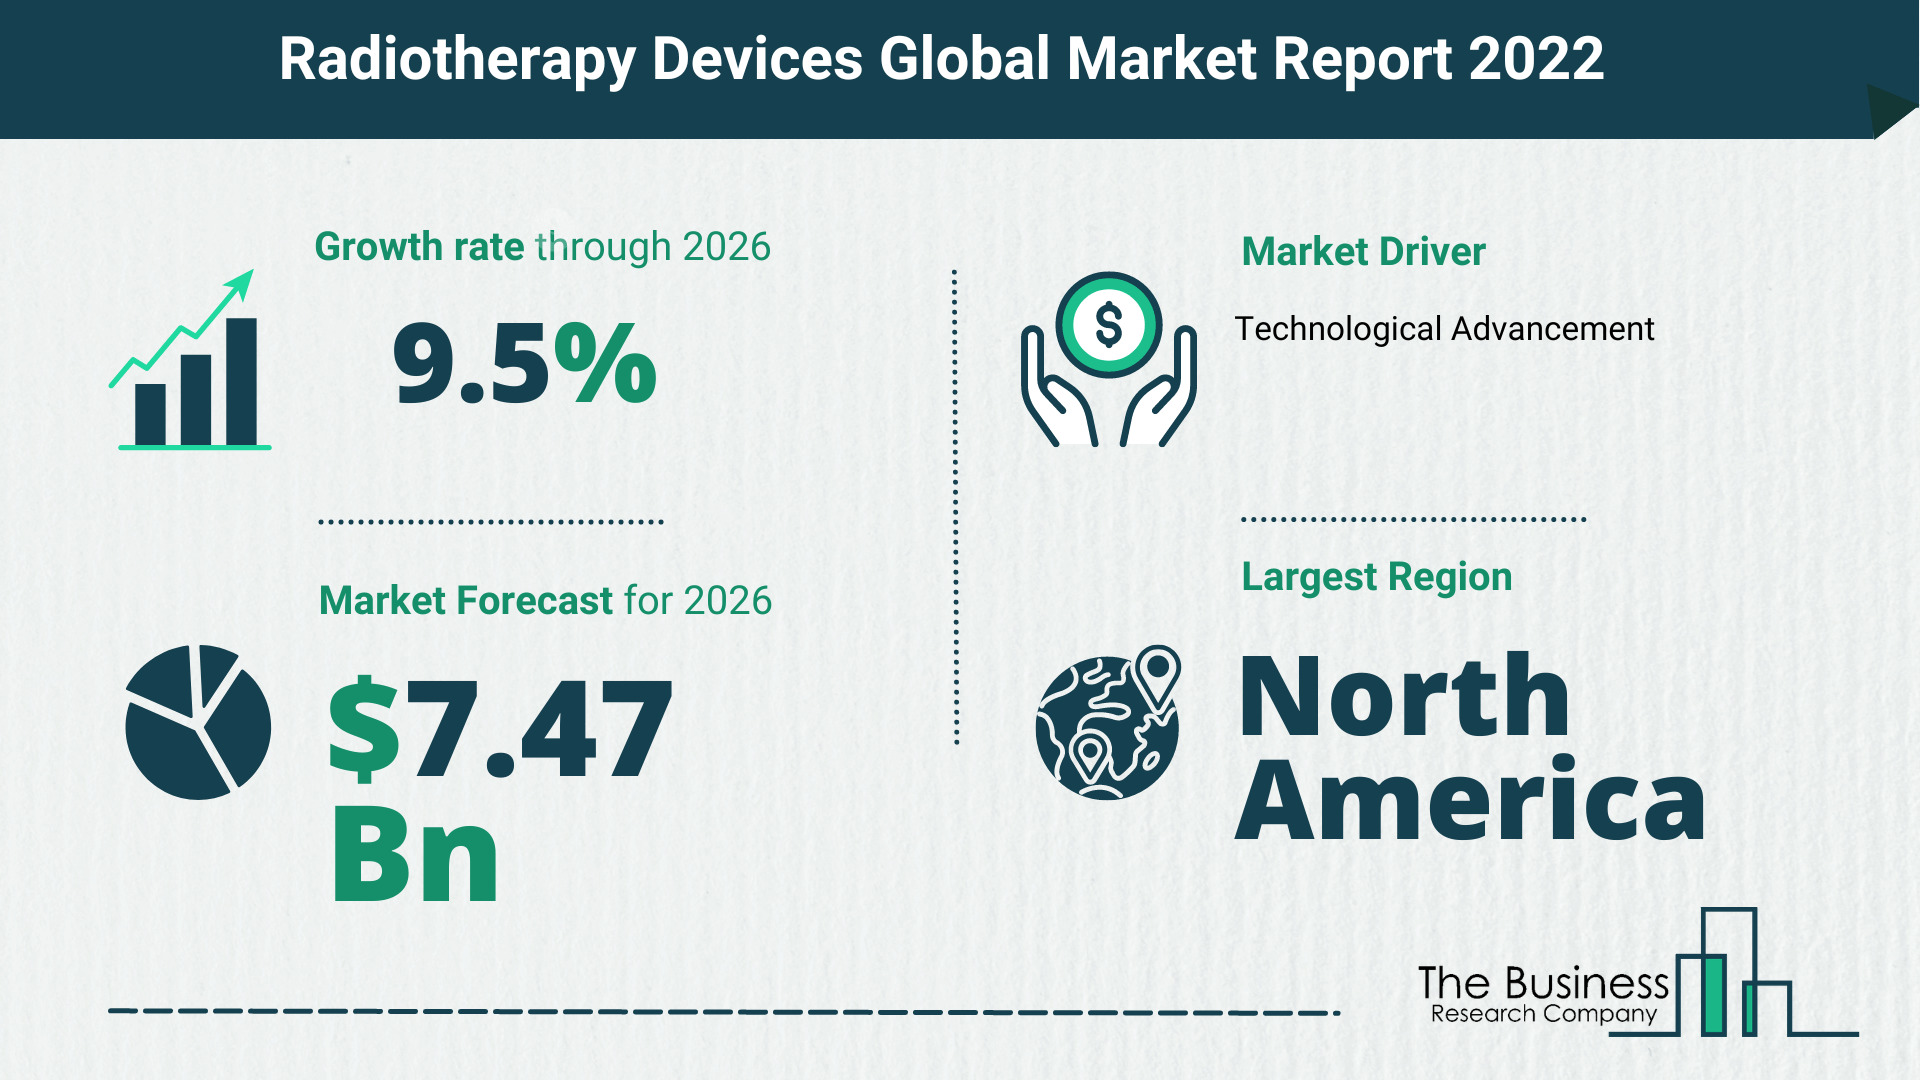 Latest Radiotherapy Devices Market Growth Study 2022-2026 By The Business Research Company